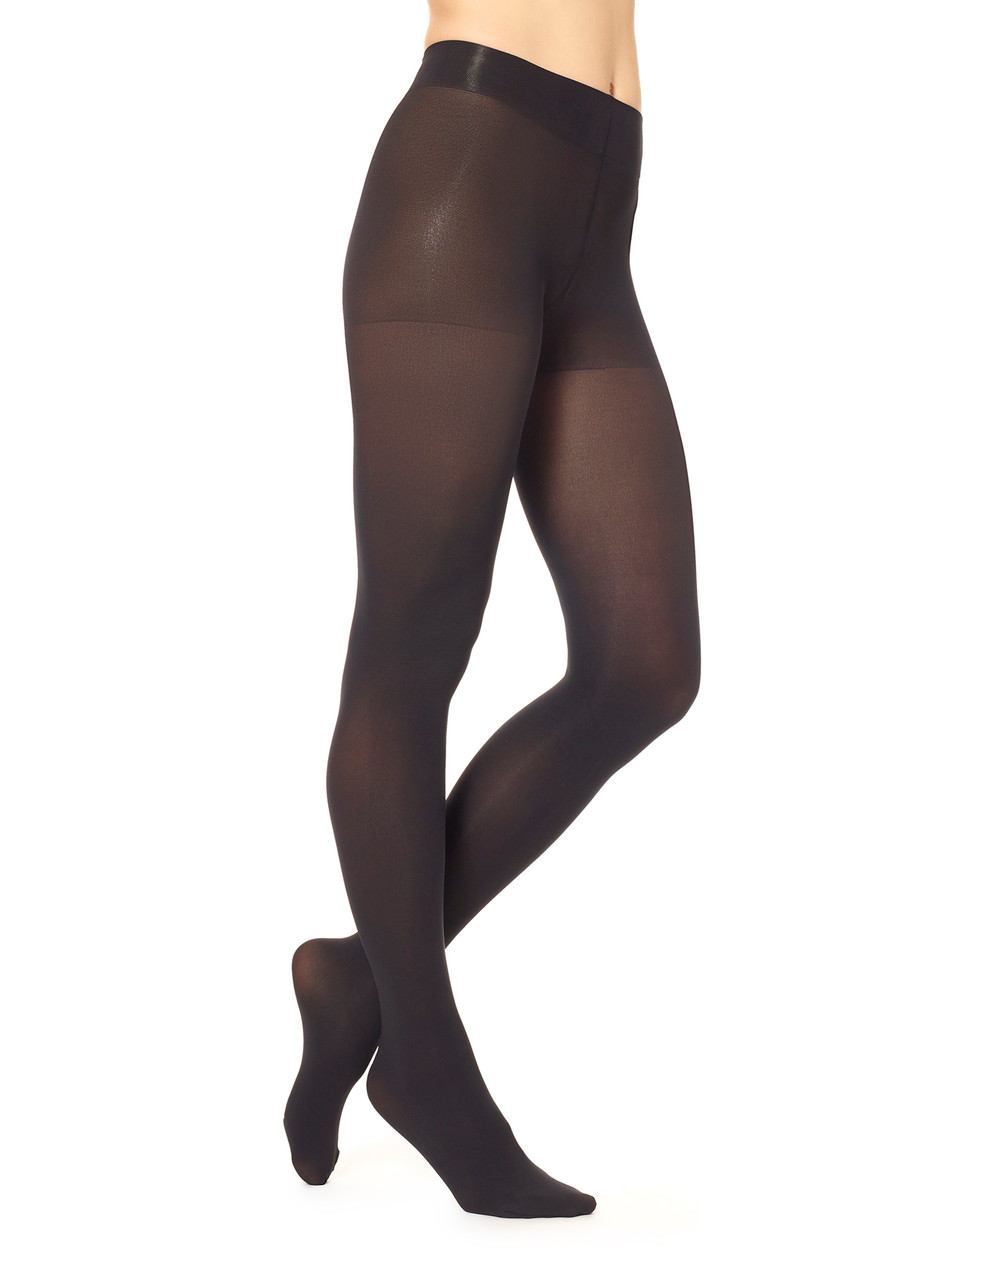 Women's Red Footless Tights for Women Ankle Length Pantyhose Plus Size  Available -  Canada